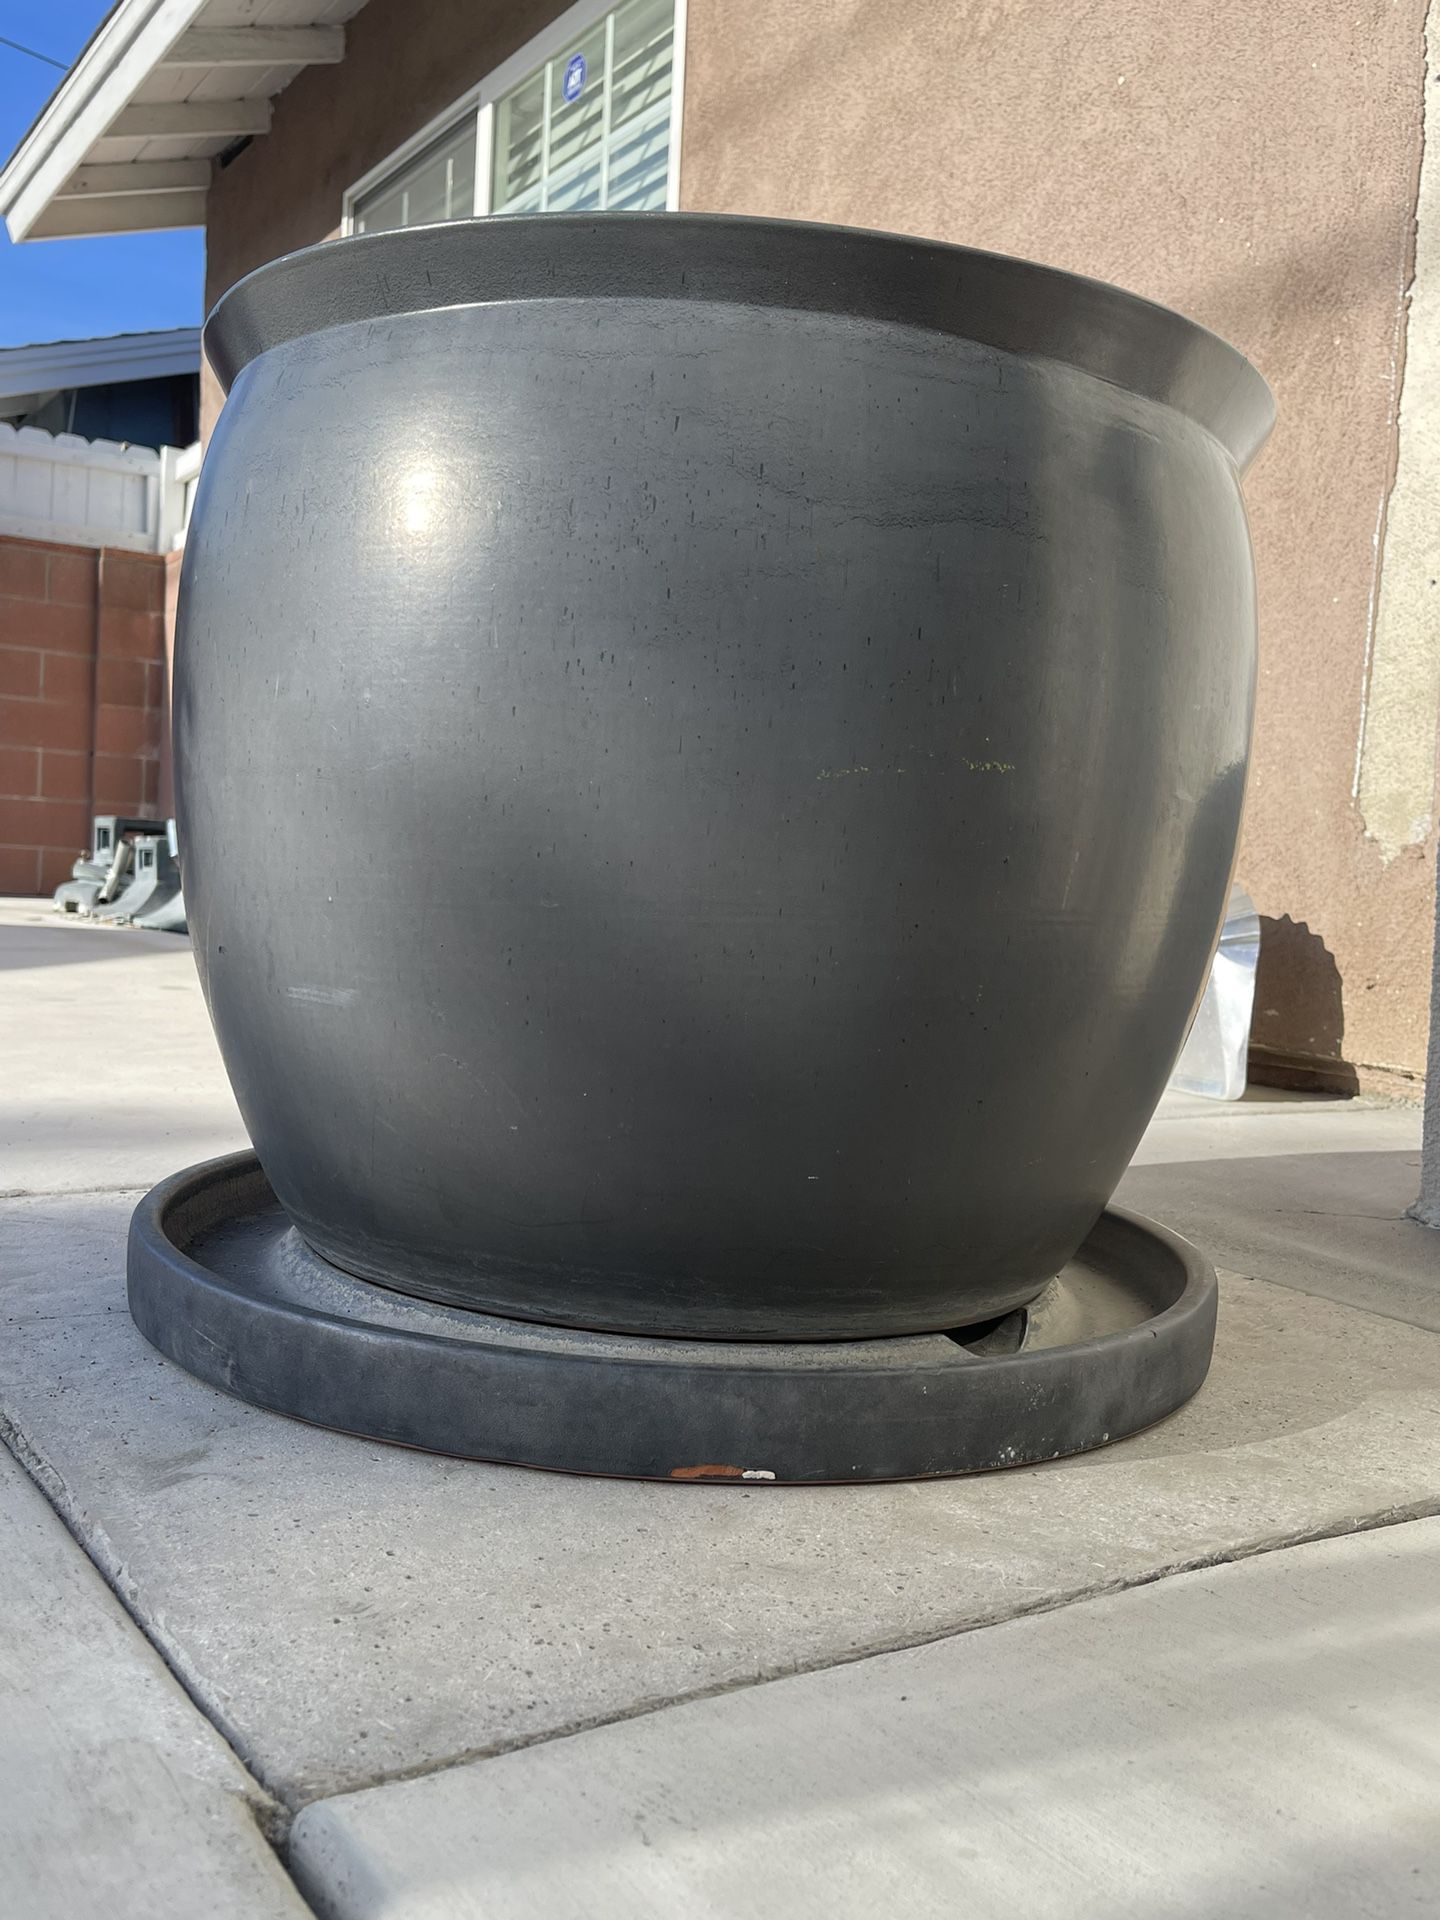 XL SUPER LARGE CERAMIC POT WITH MATCHING DRAIN PLATE 